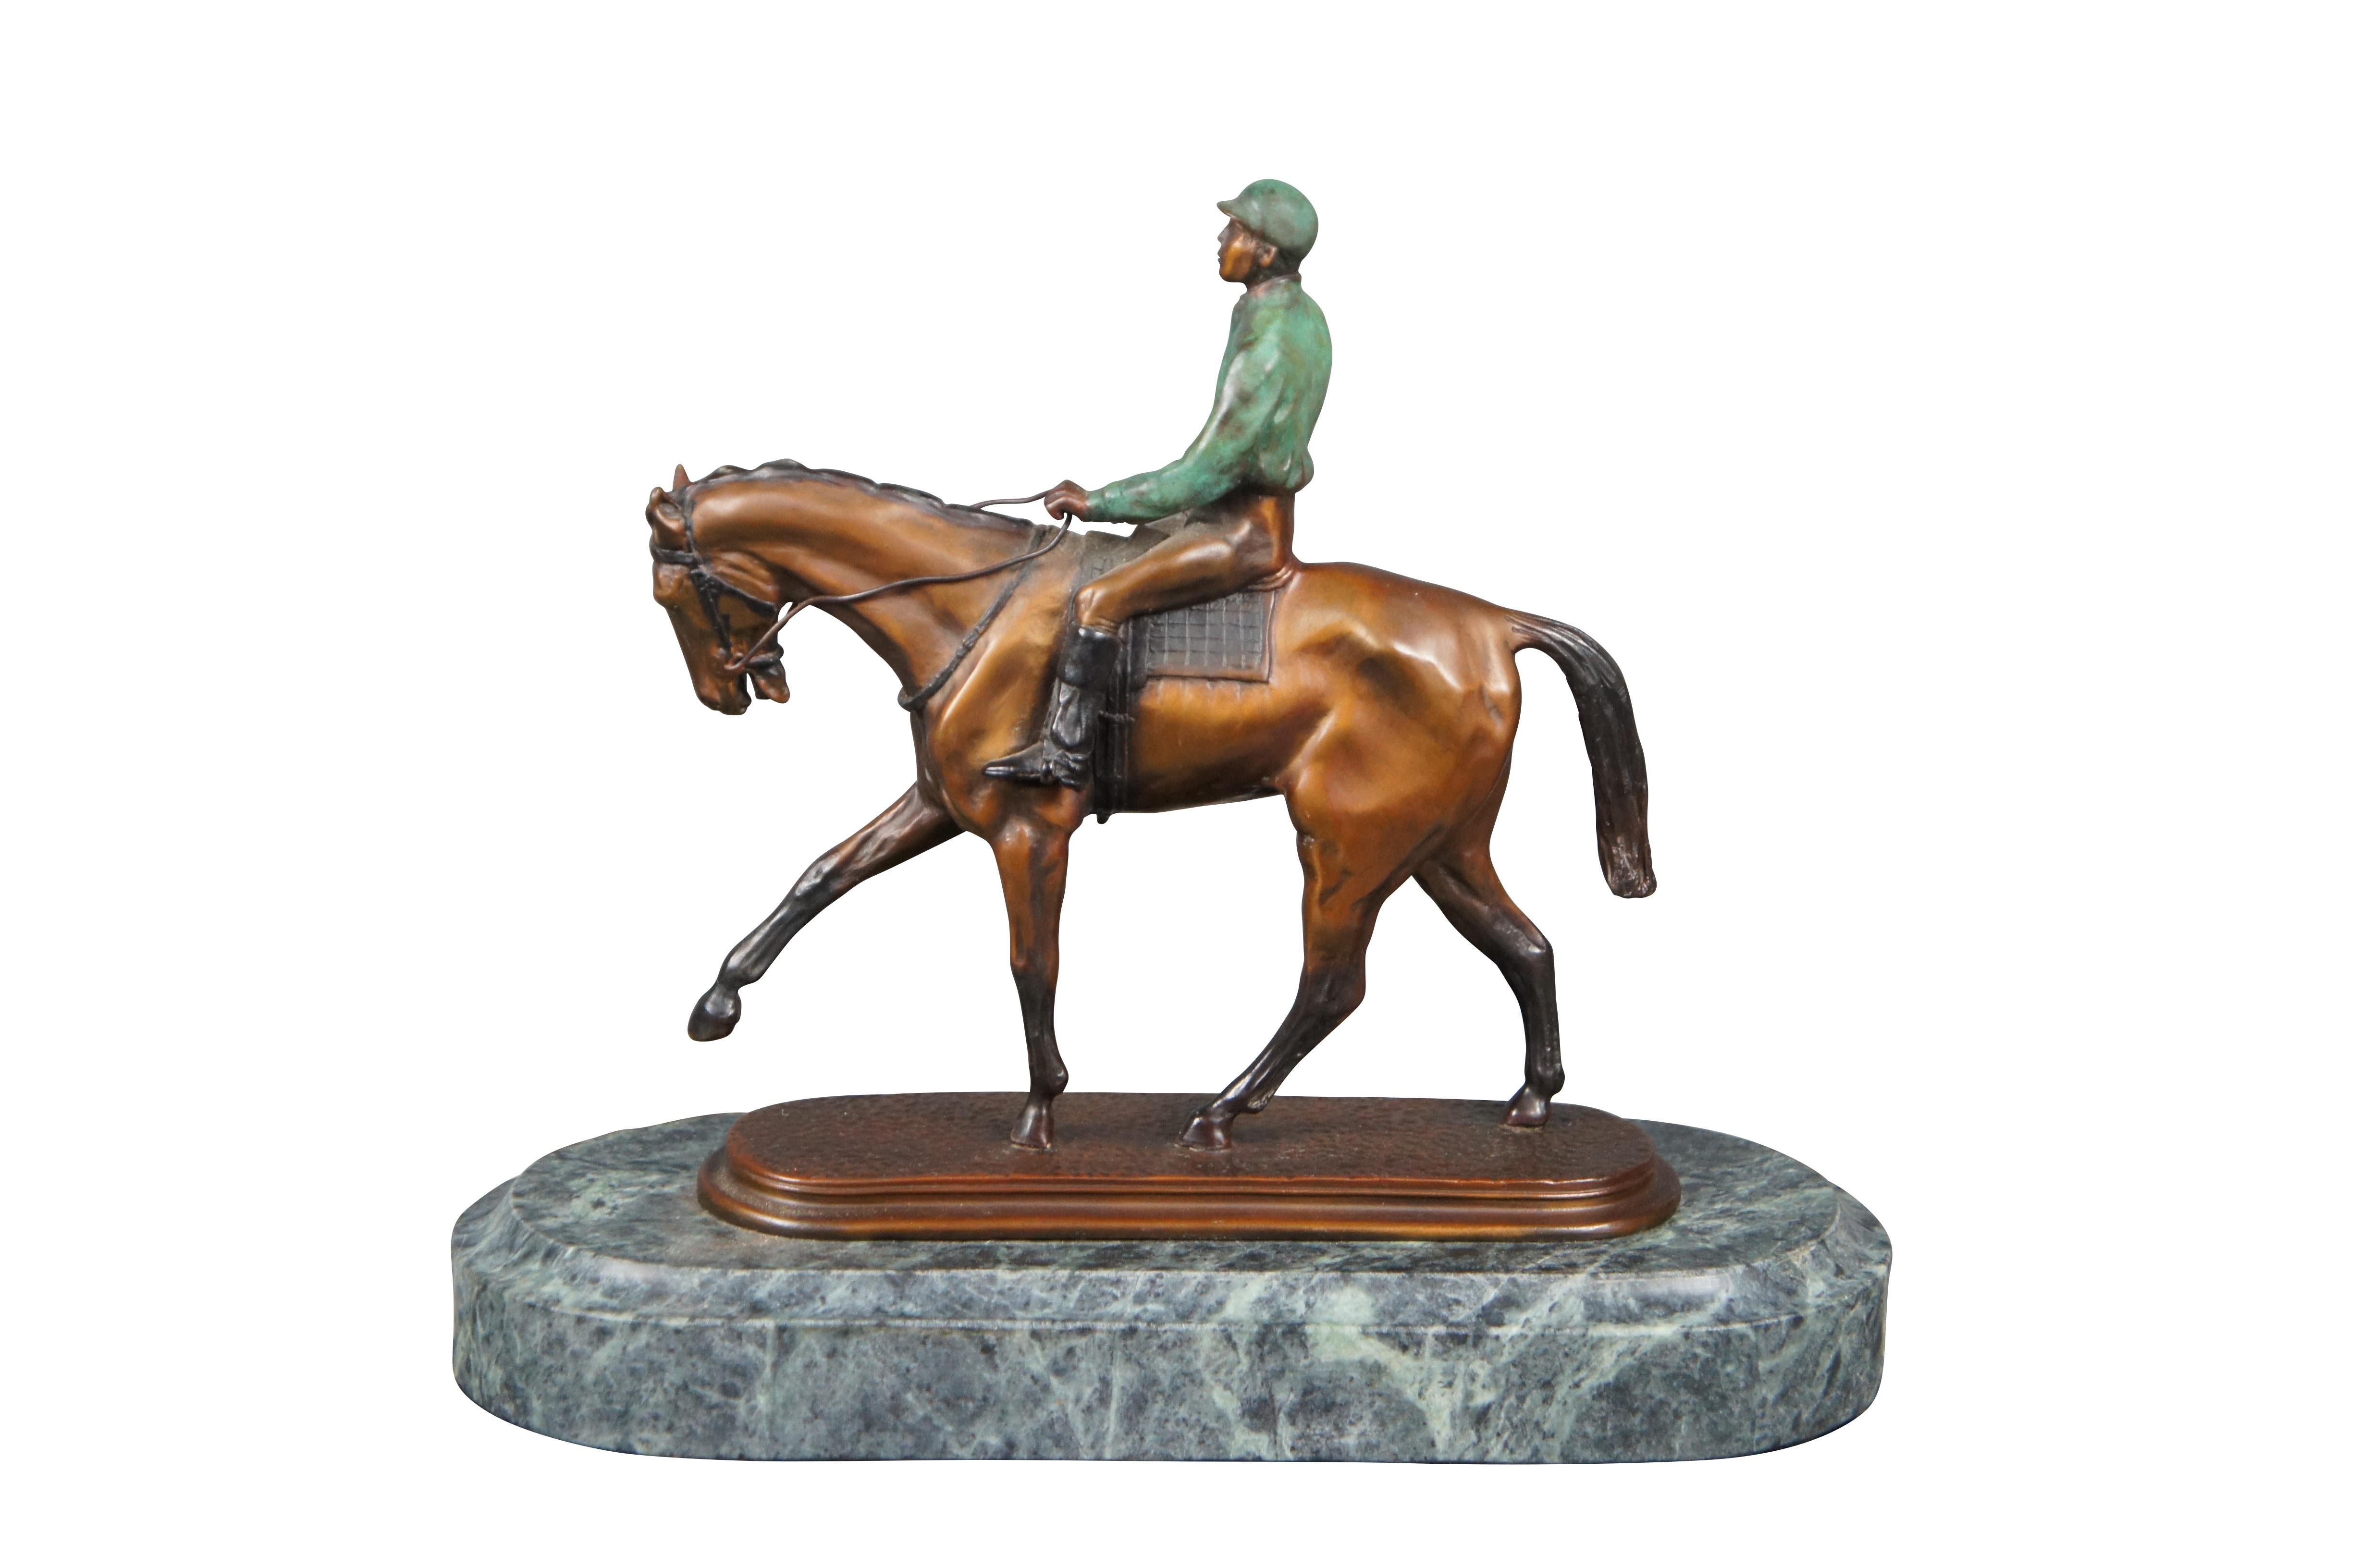 Vintage horse trophy / statue / sculpture. Made of bronze featuring an oval marble base and plaque from the Dehere Member Guest Invitational tournament (combined net aggregate win) at Due Process Golf Club and Stables in Colts Neck New Jersey.